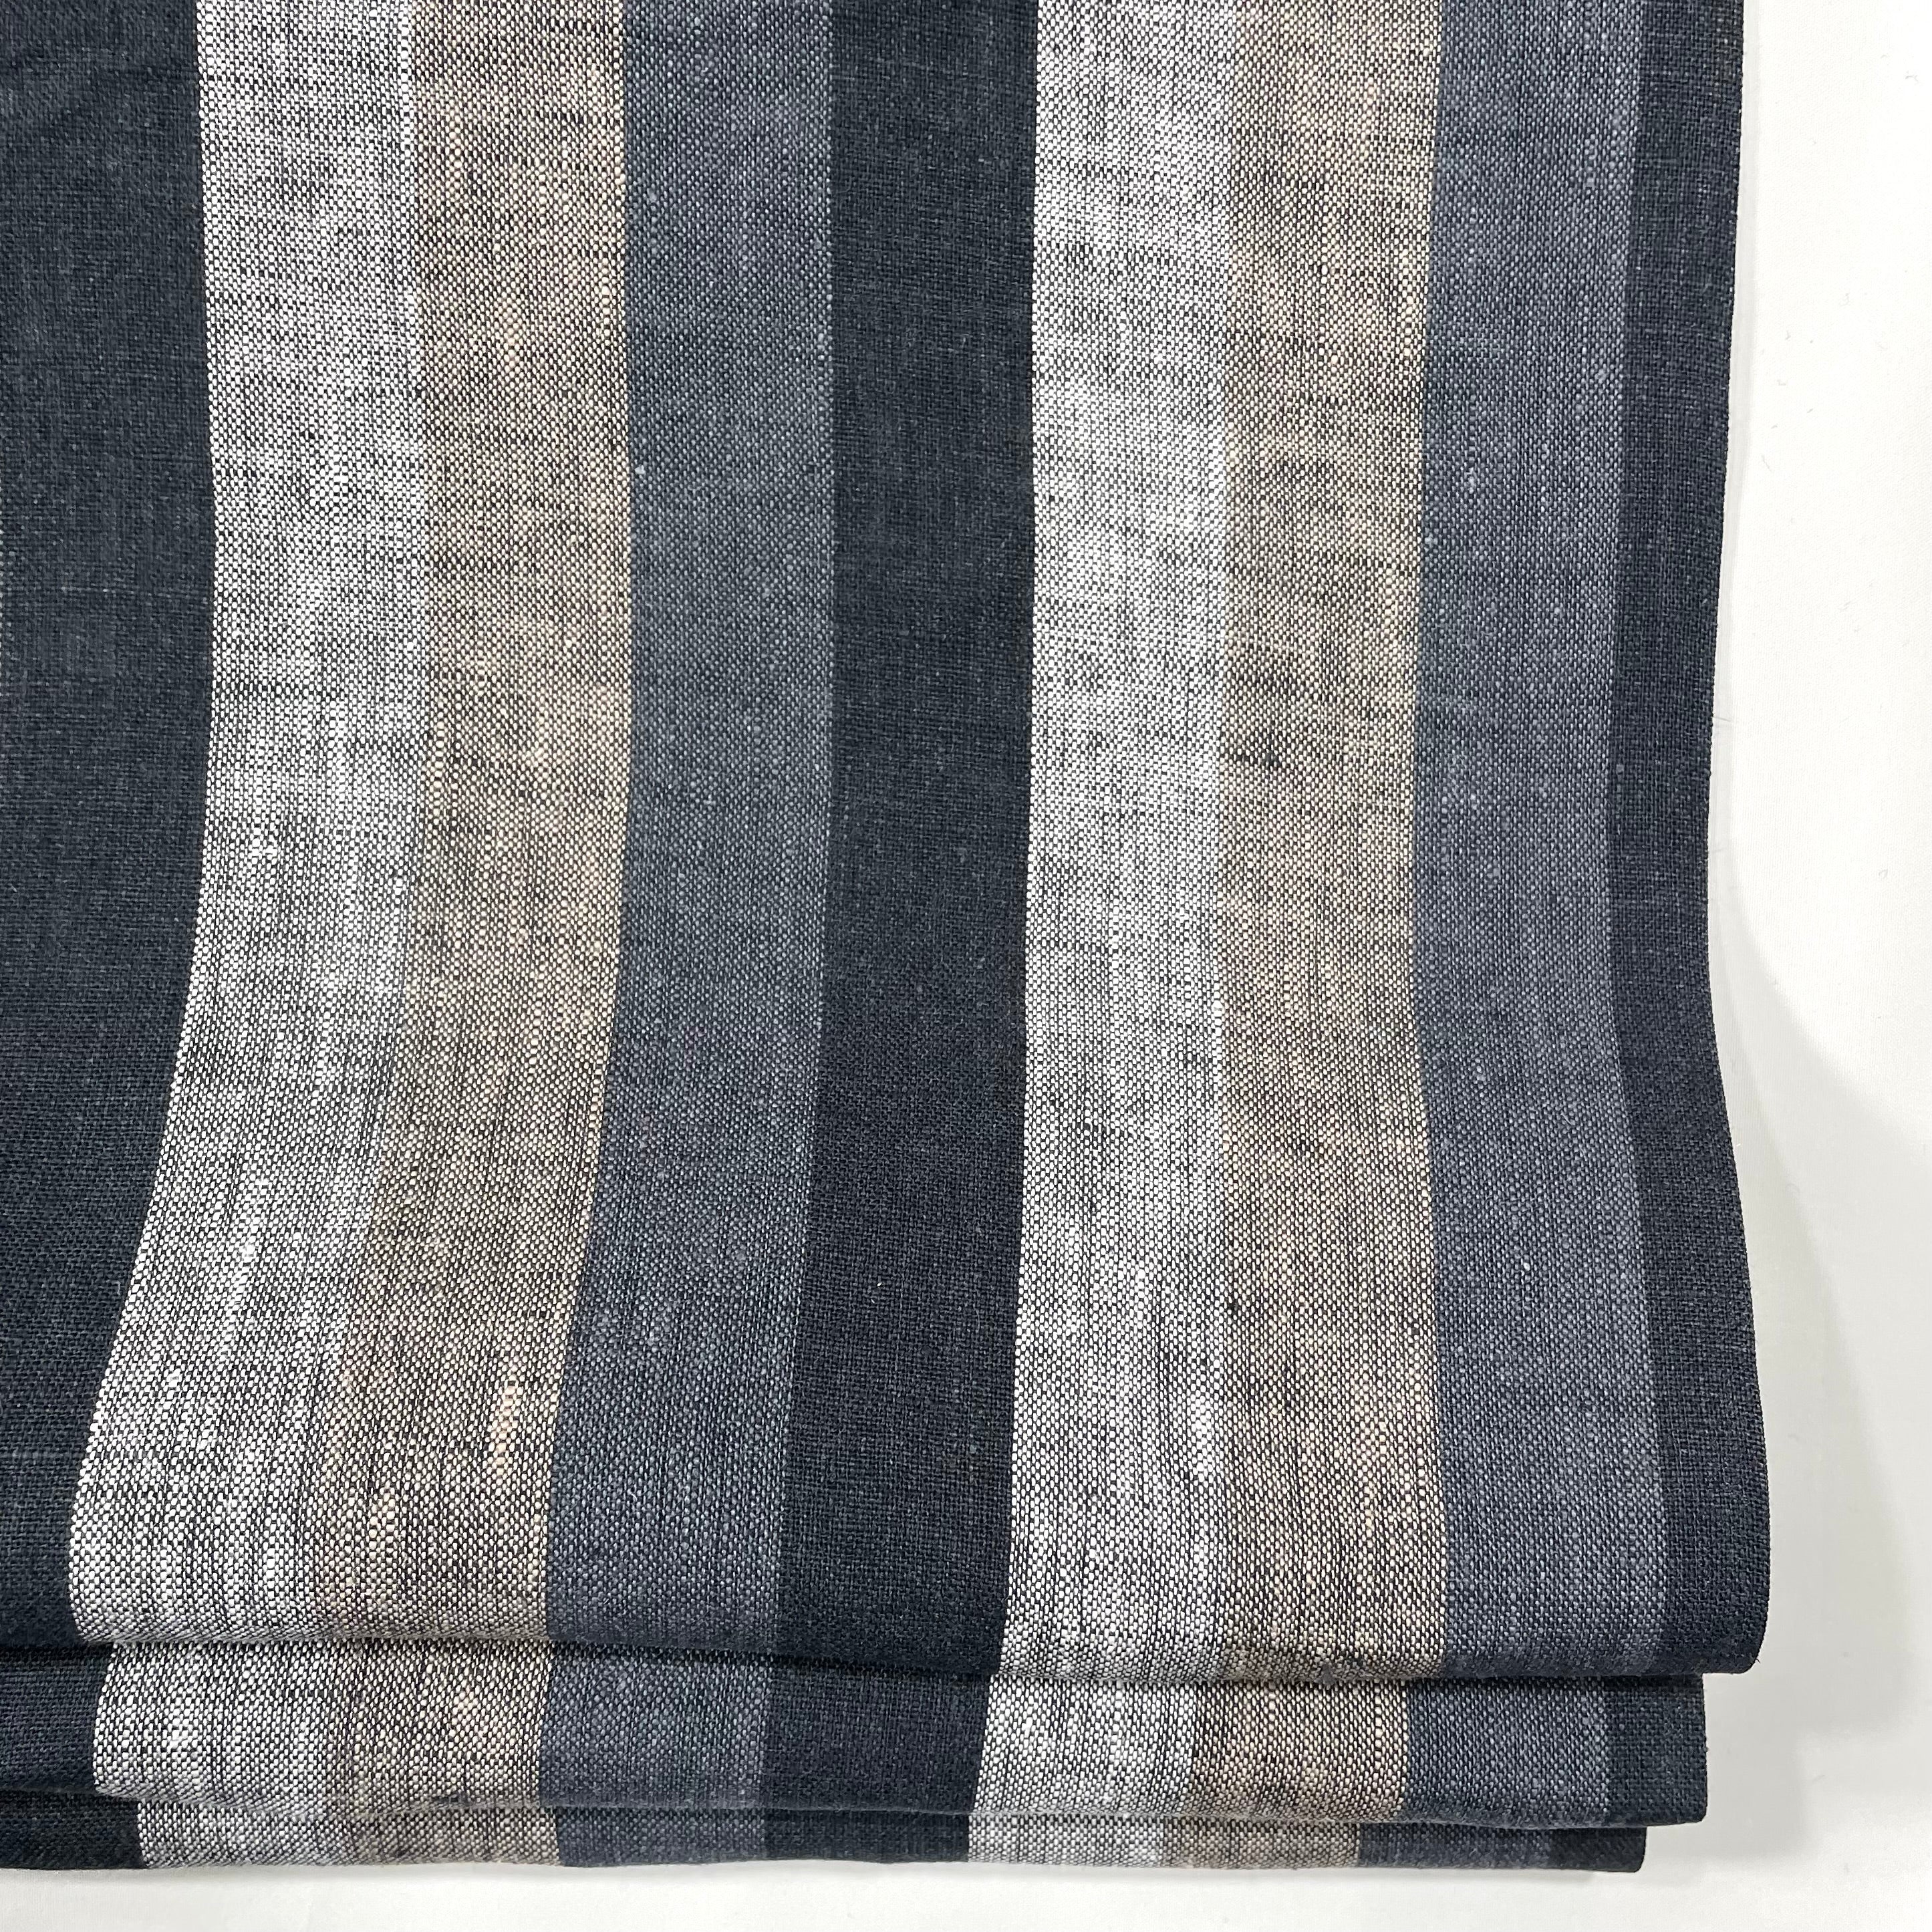 Dark Striped Multi Colors 100% Natural Linen Flat Relaxed Casual Roman Shade